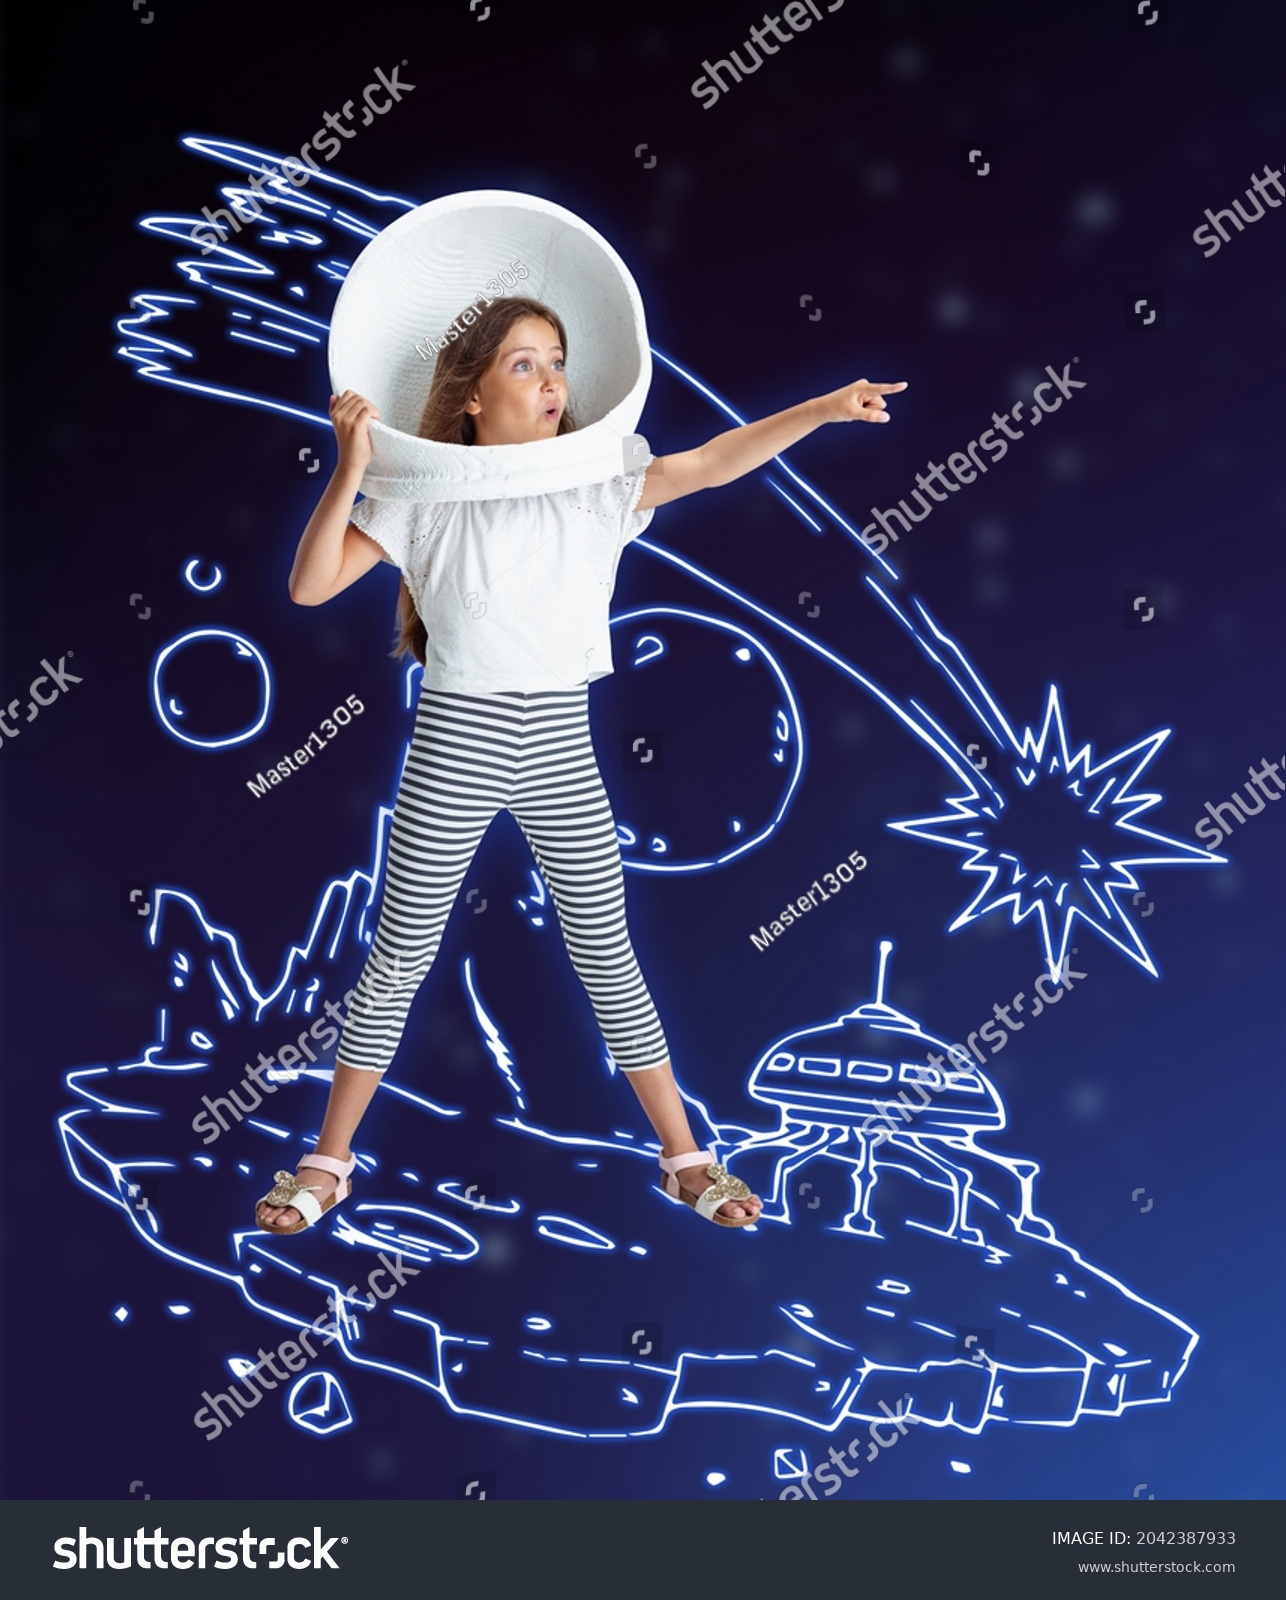 Exploring space. Creative artwork with little girl in huge white astronaut helmet standing among drawn planets, asteroids and stars in outer space. Ideas, inspiration, imagination. Collage #2042387933